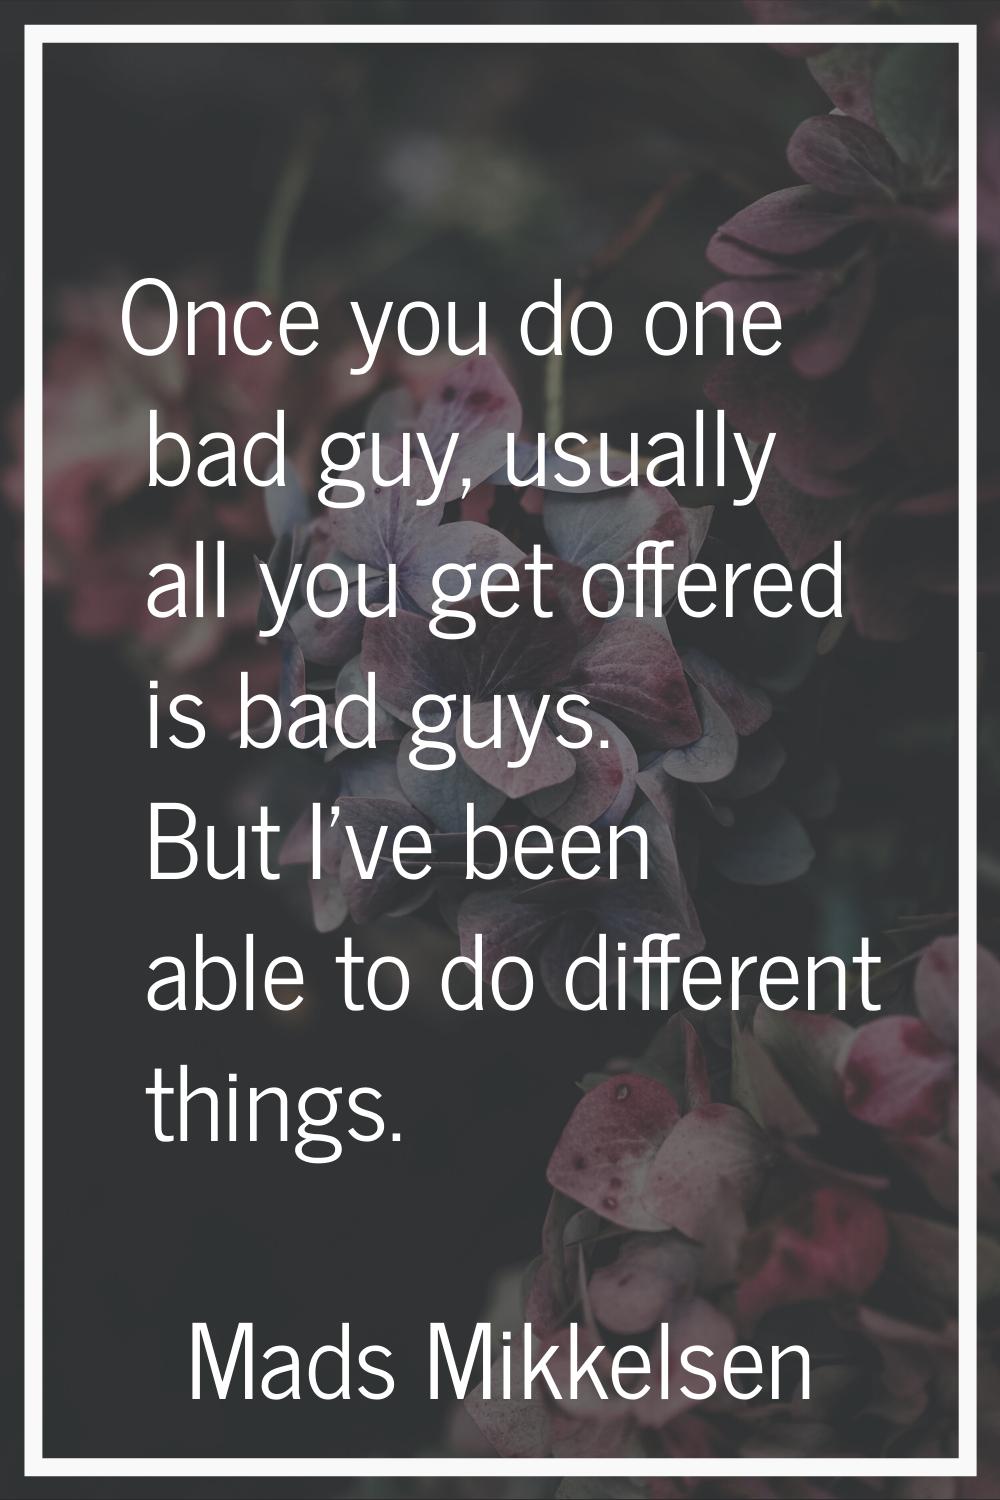 Once you do one bad guy, usually all you get offered is bad guys. But I've been able to do differen